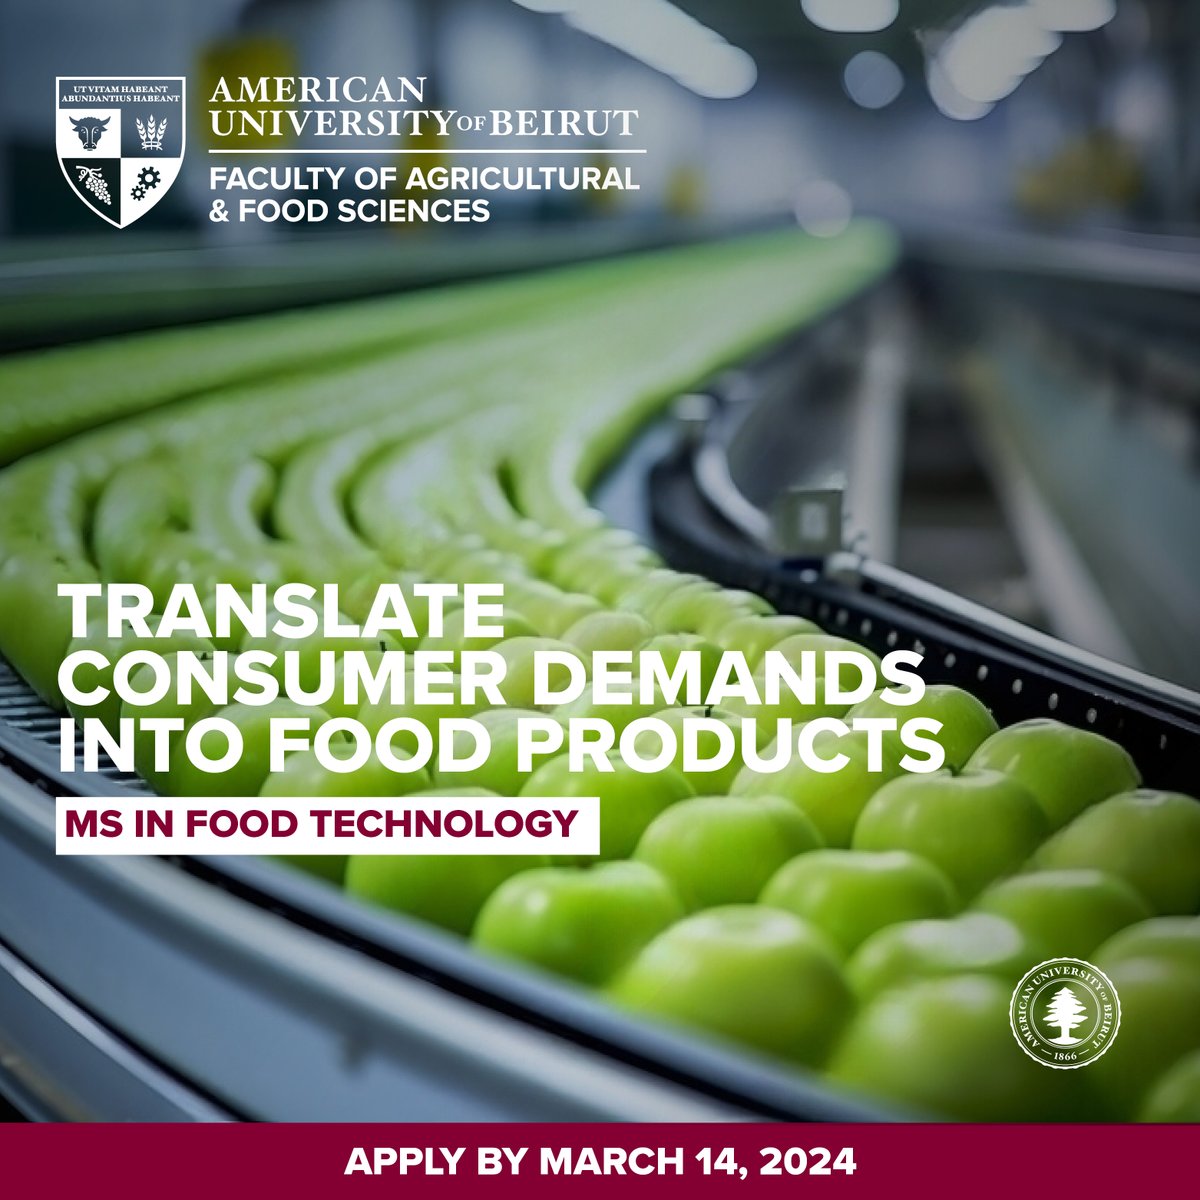 #FAFS MS in Food Technology program is dedicated to tackling the evolving needs of our #food system. From sustainability to social responsibility, we're on a mission to create safe, nutritious & affordable food. Apply by March 14, 2024. 🔗bitly.ws/VZfC